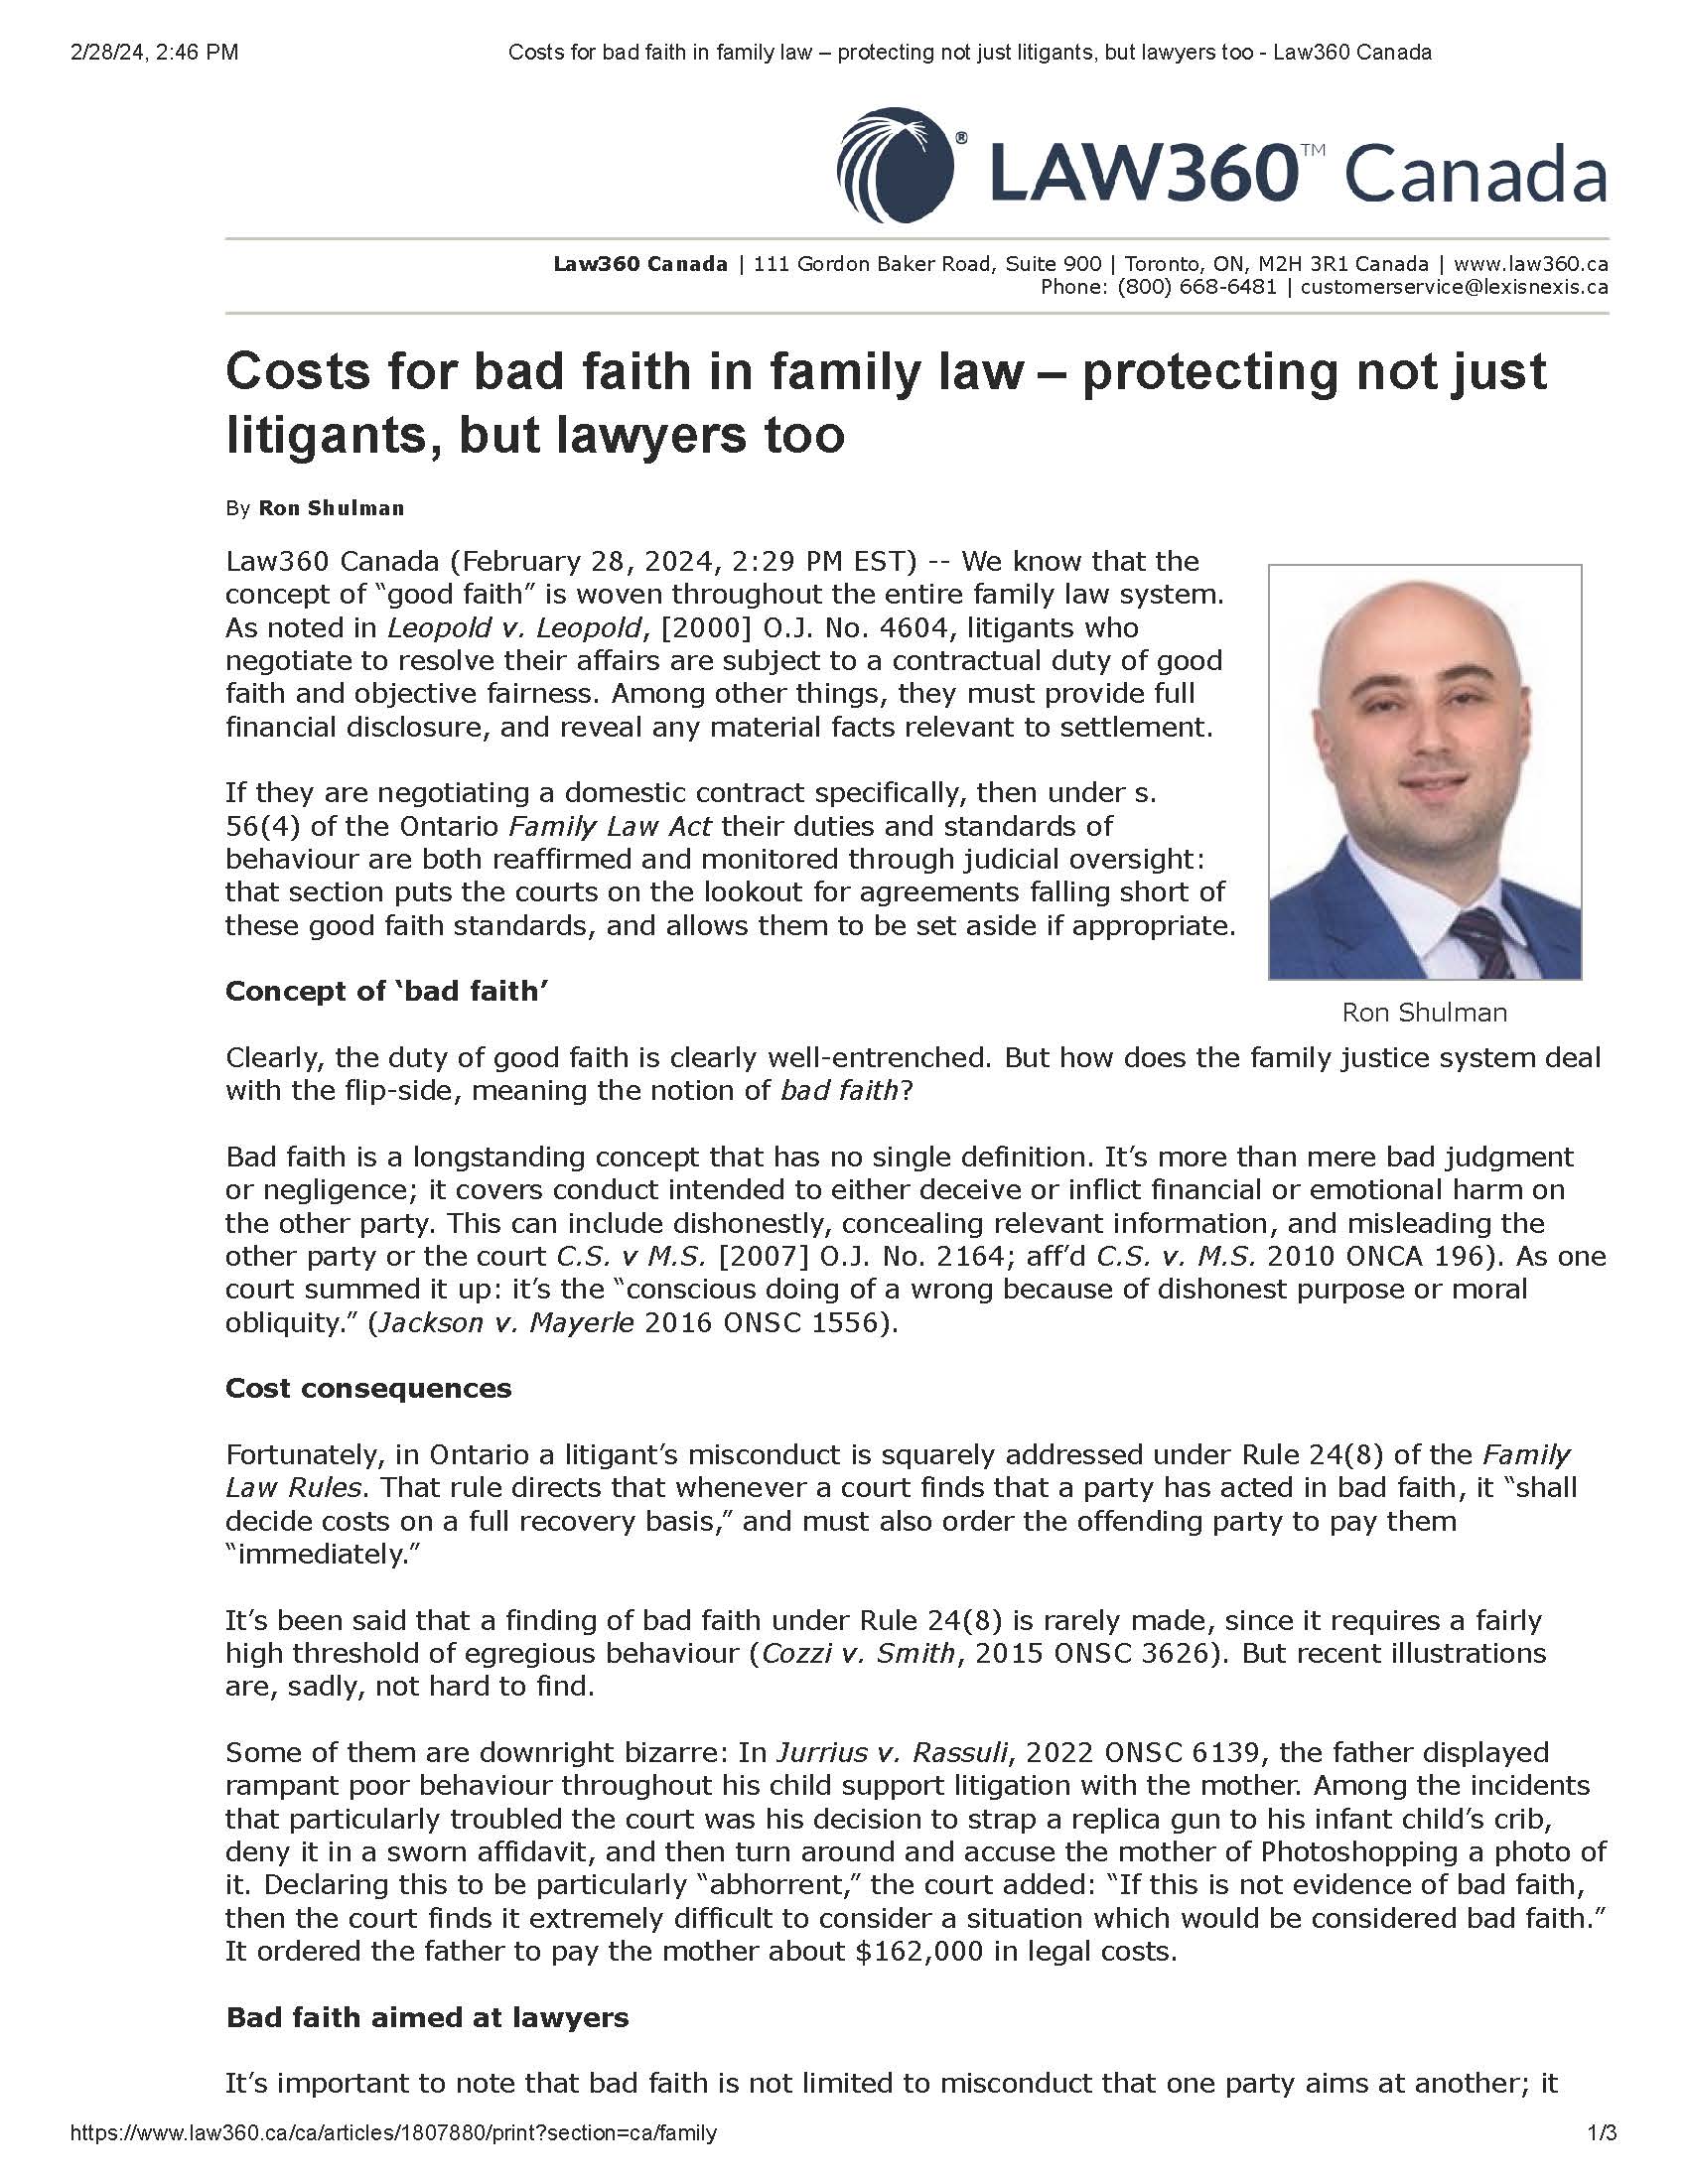 Ron Shulman - Costs for bad faith in family law..__Page_1